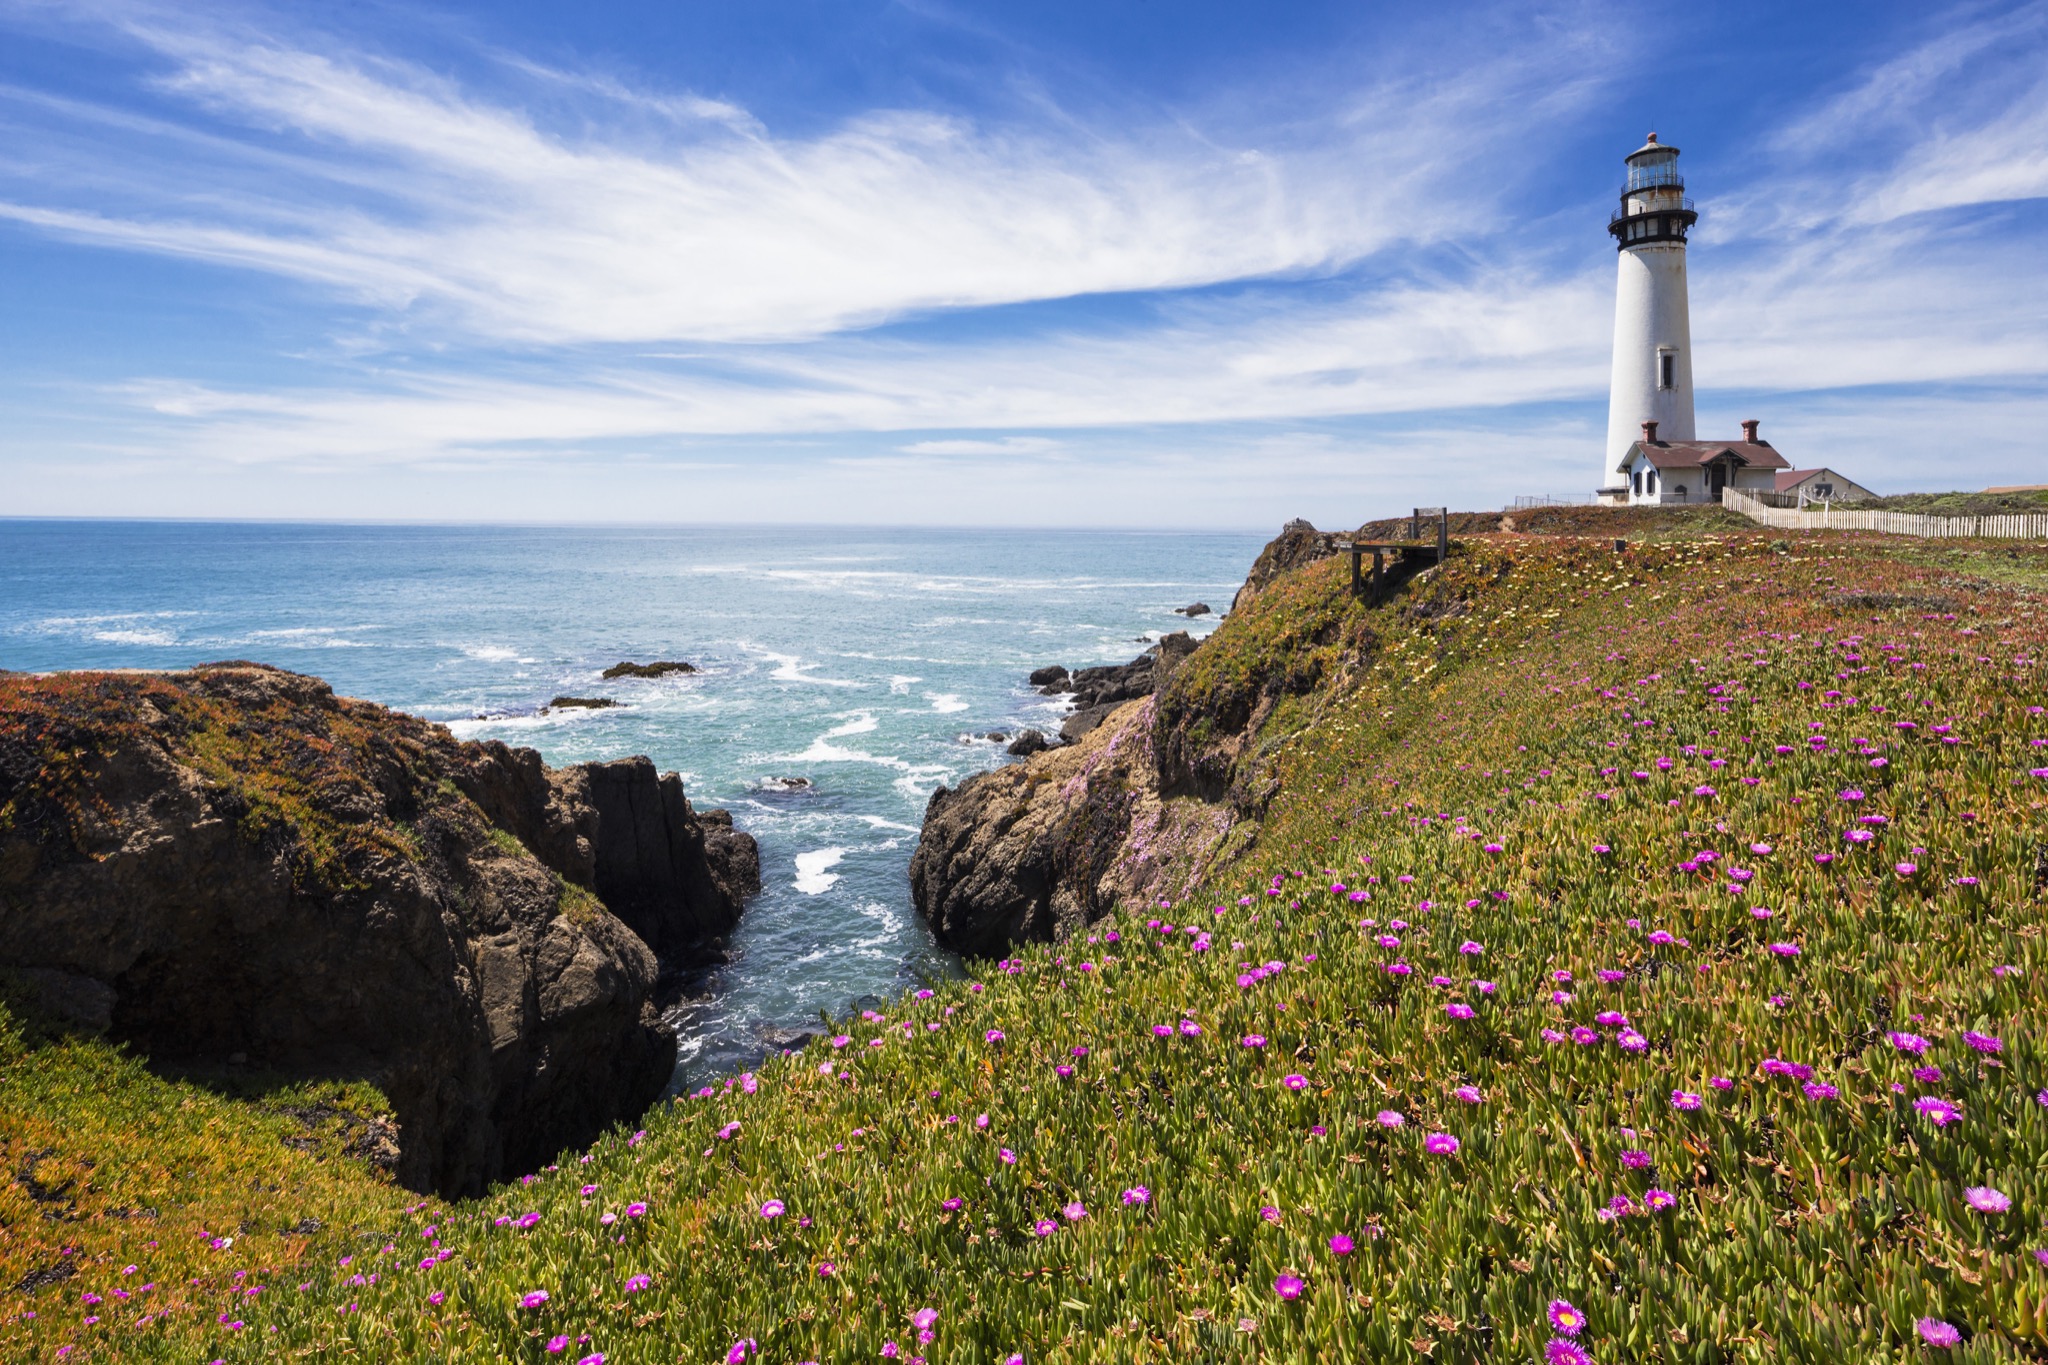 25 reasons to take a Highway 1 road trip from San Francisco to Big Sur